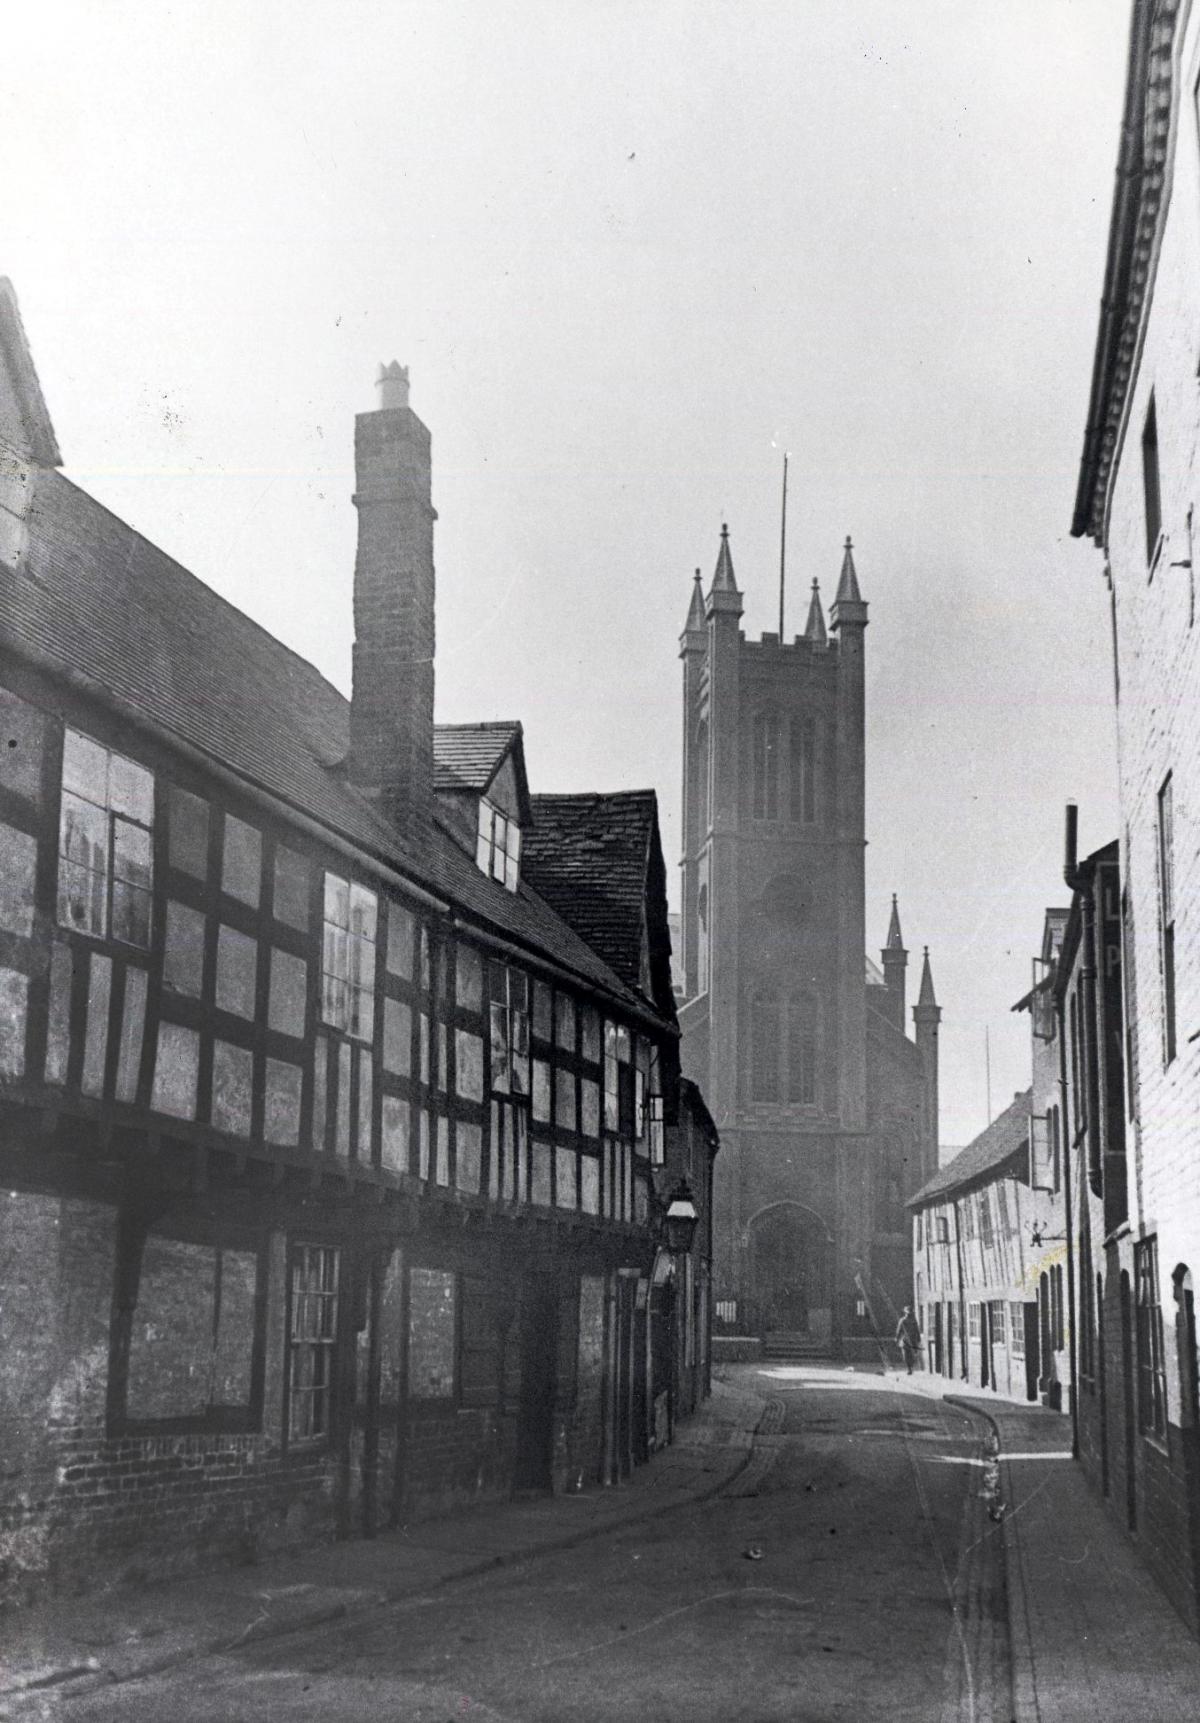 Vanished Worcester. Vintage view of St Peter’s Street, Worcester, showing some of its fine centuries-old half-timbered buildings